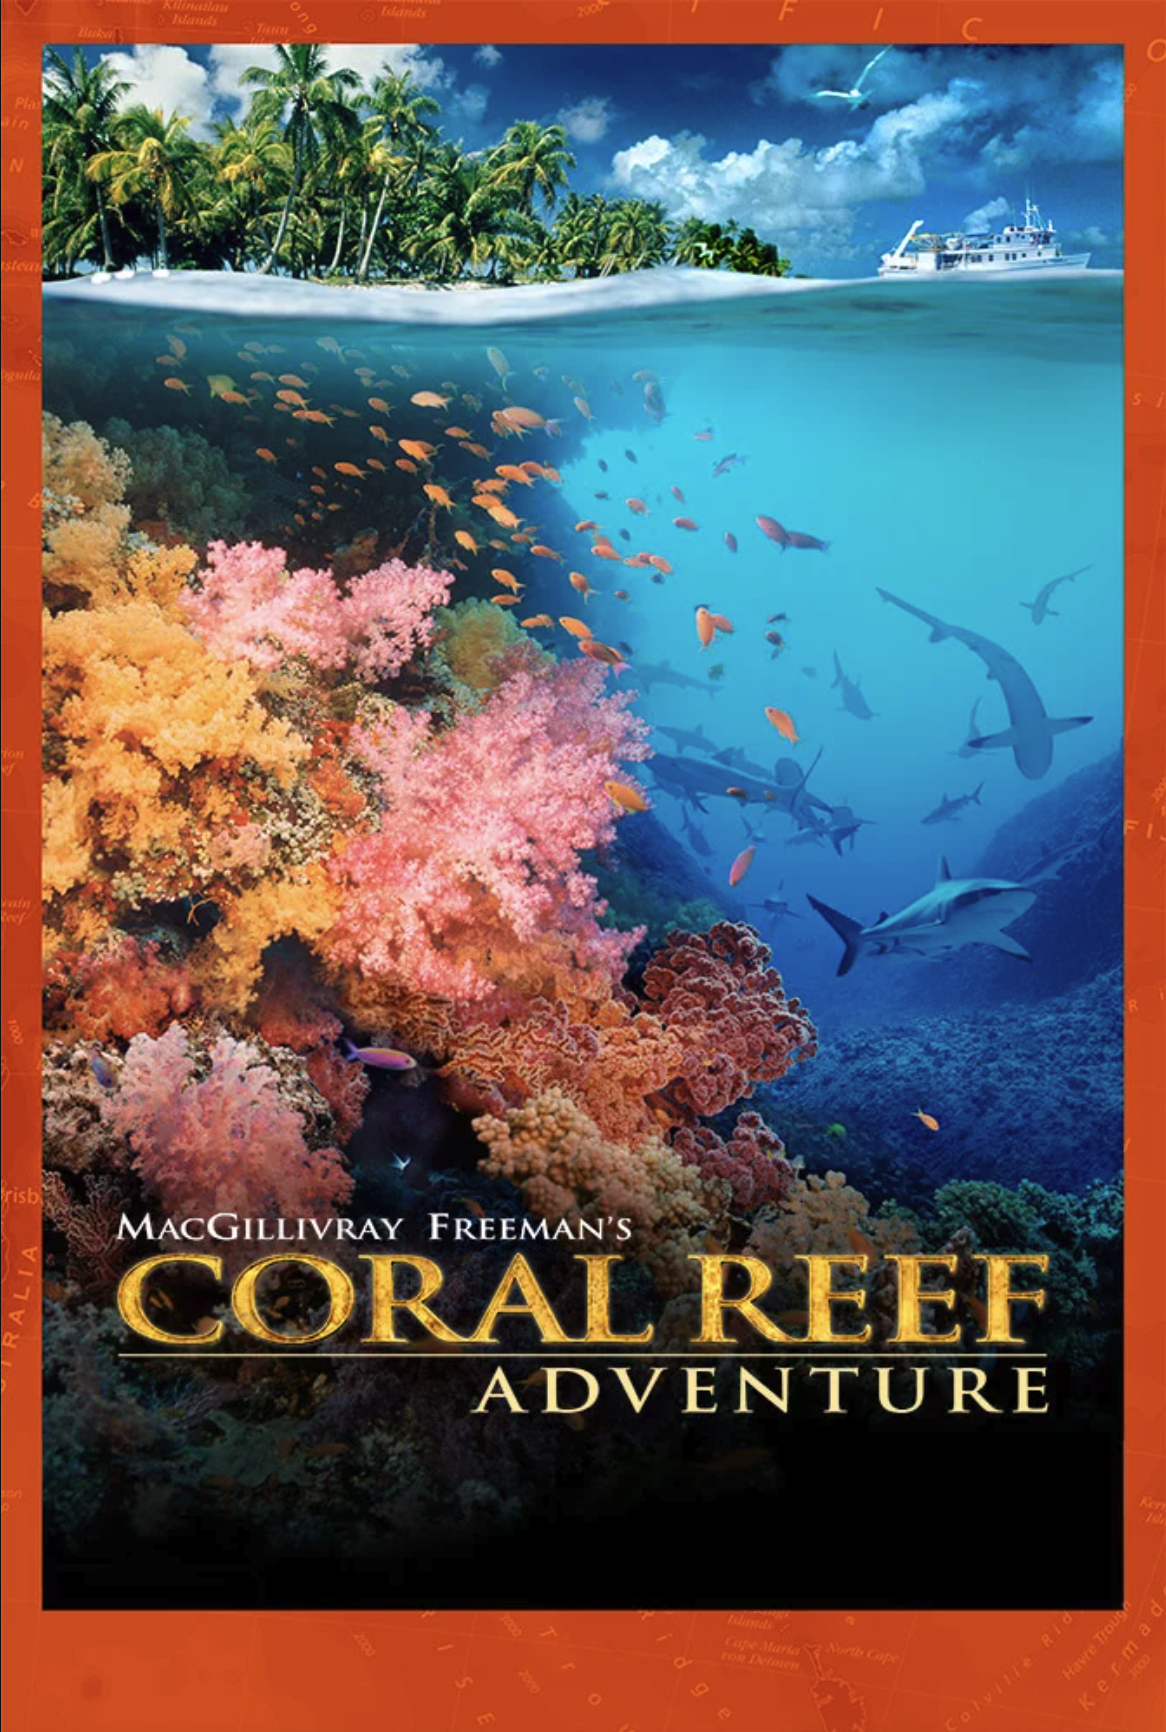 A Coral Reef Adventure IMAX